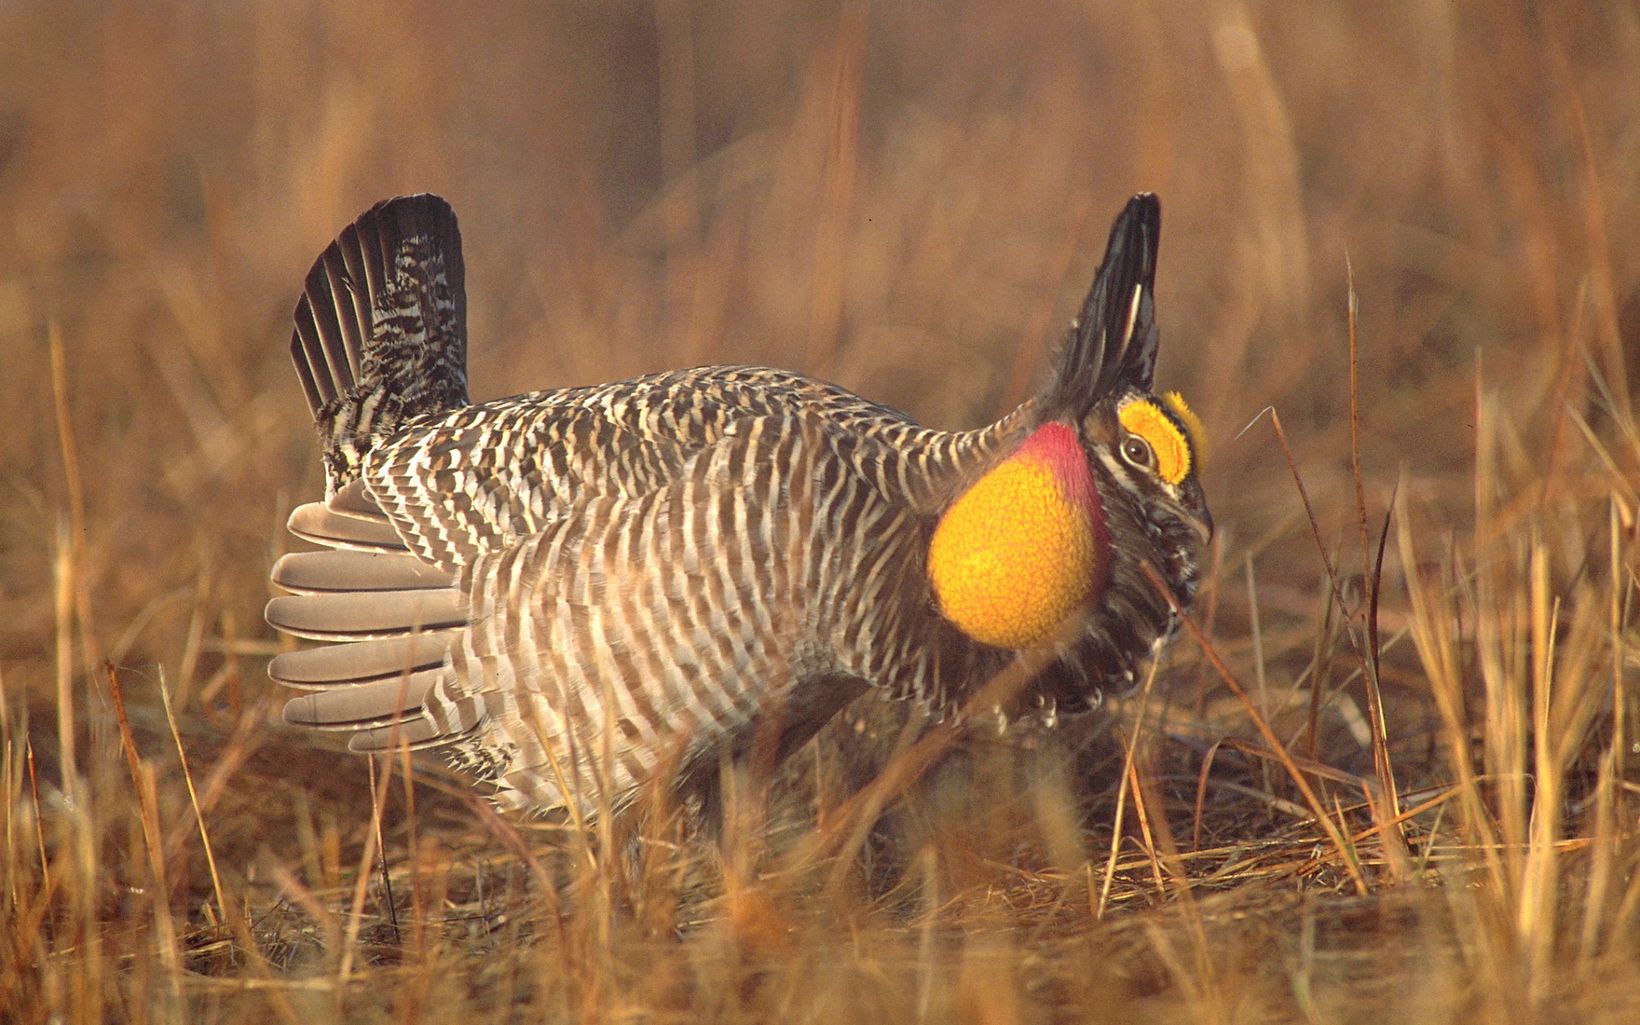 Greater prairie chicken inflates its throat sacks to prepare for booming. © Dominique Braud